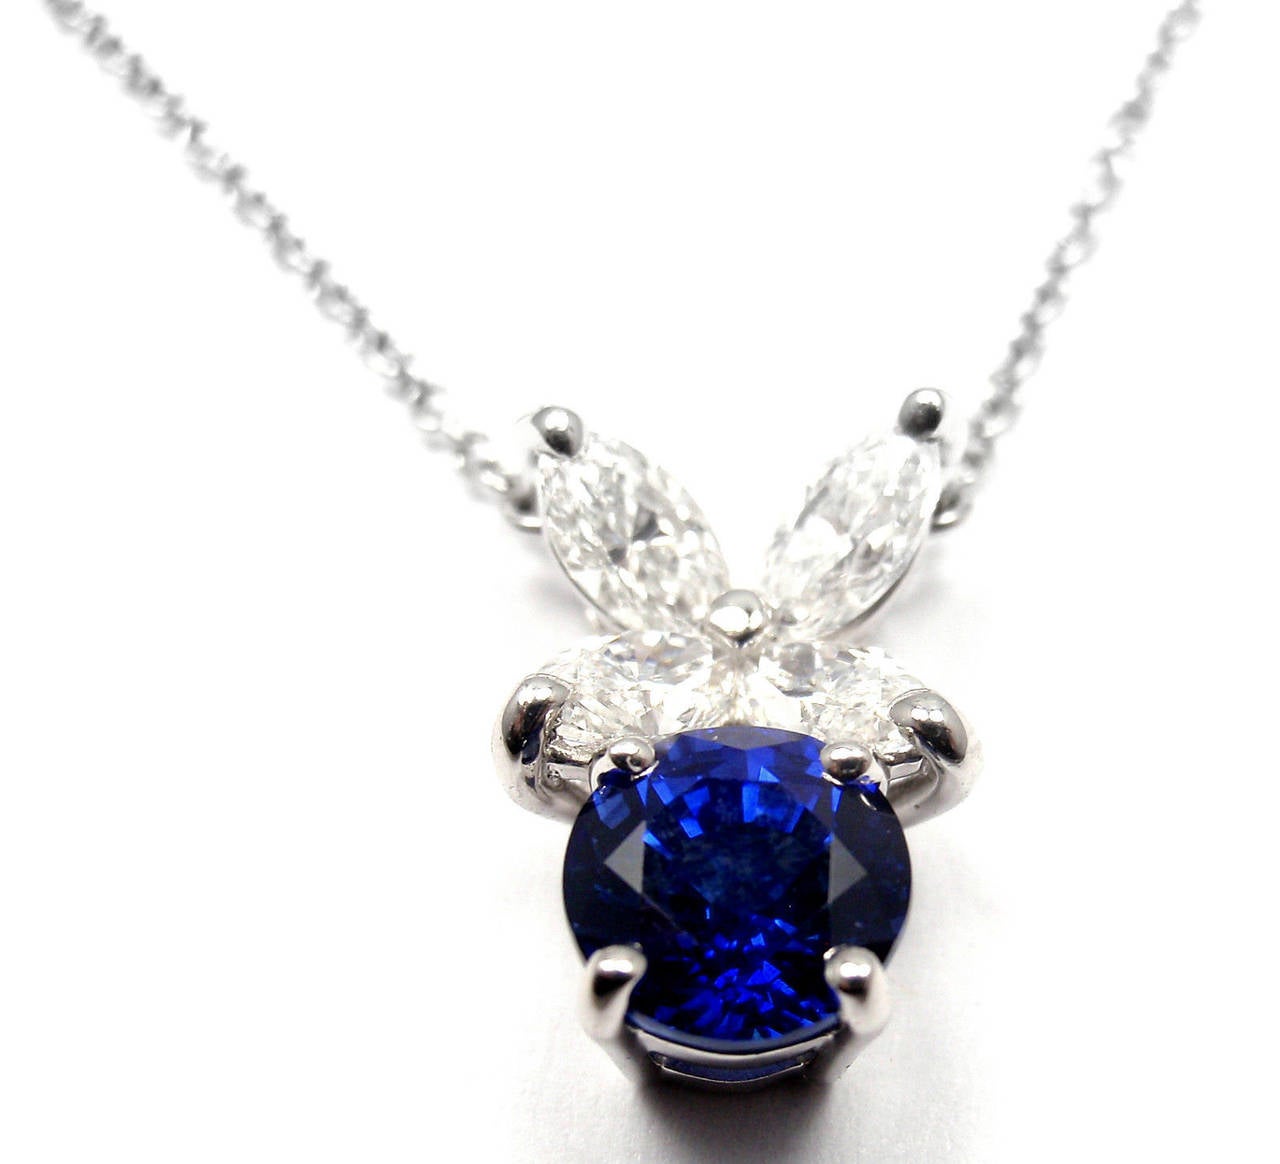 Platinum Victoria Diamond and Sapphire Pendant Necklace by Tiffany & Co. 
With 4 marque shape brilliant cut diamonds  
t/w = .60ct  VS1 clarity F color
1 round sapphire approx. 1ct

Details: 
Weight: 3.9 grams
Length: 16